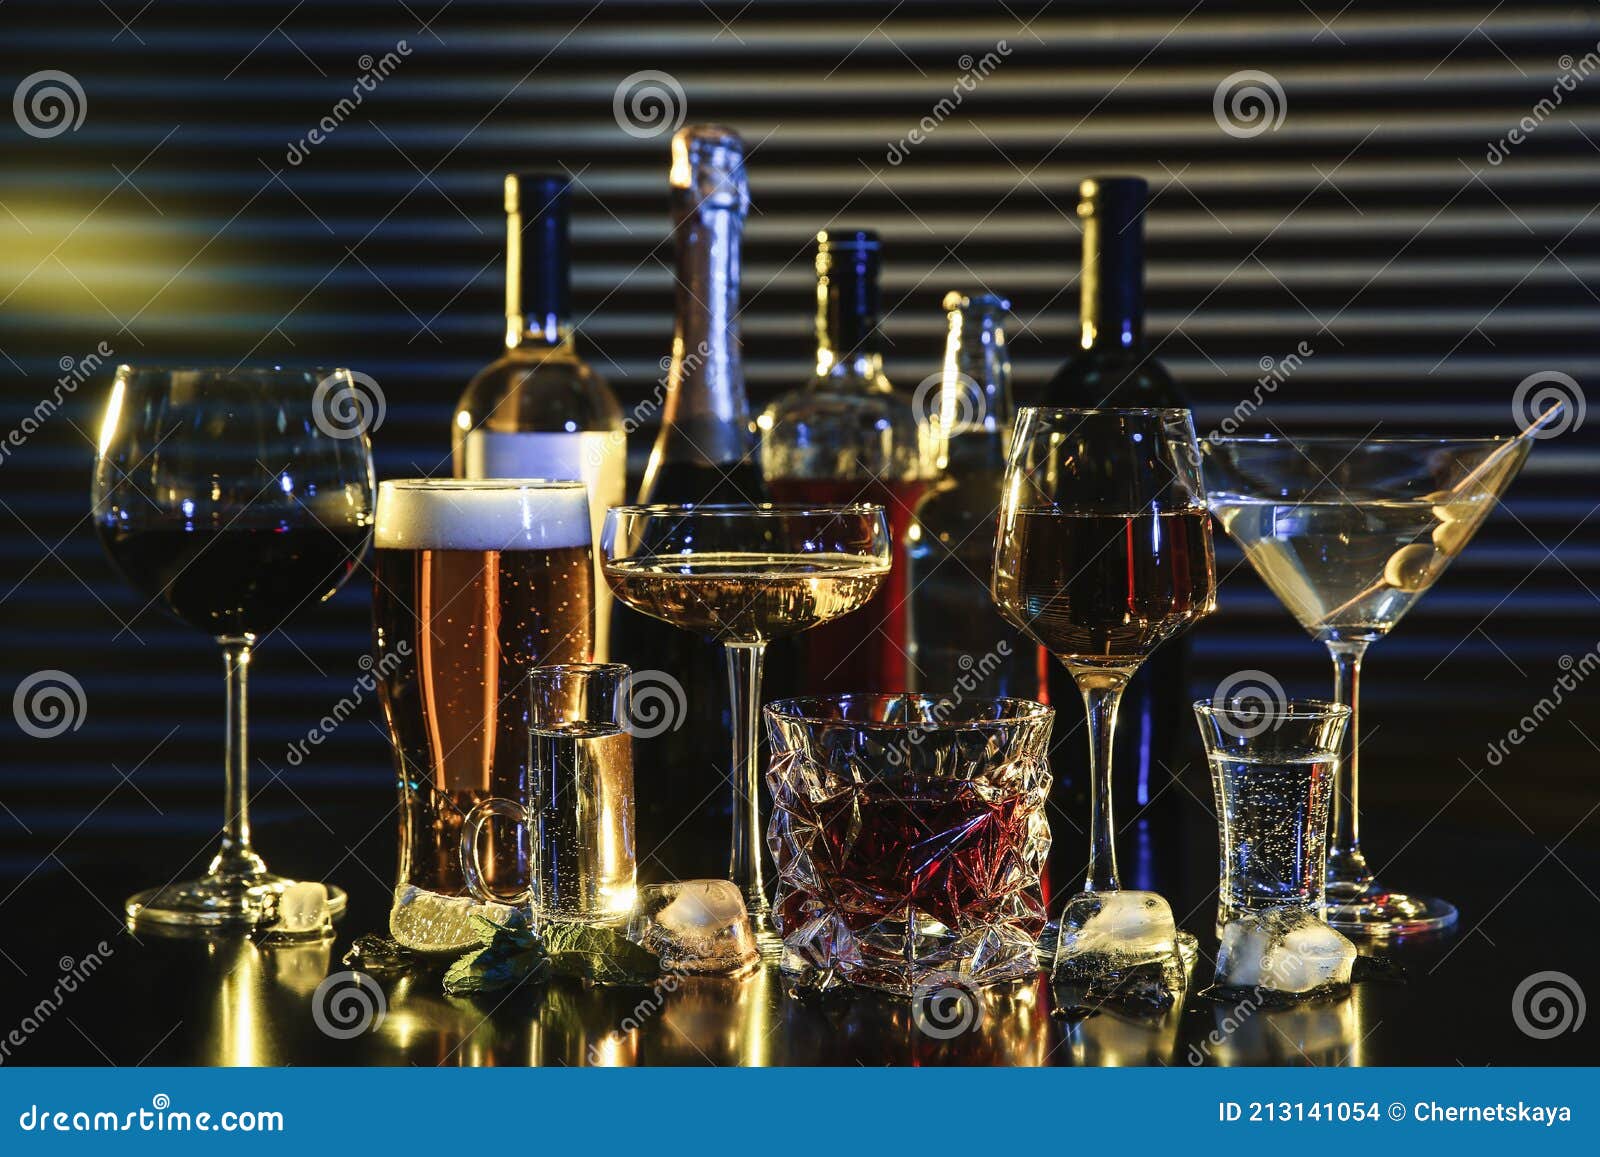 many different alcoholic drinks on table against dark background